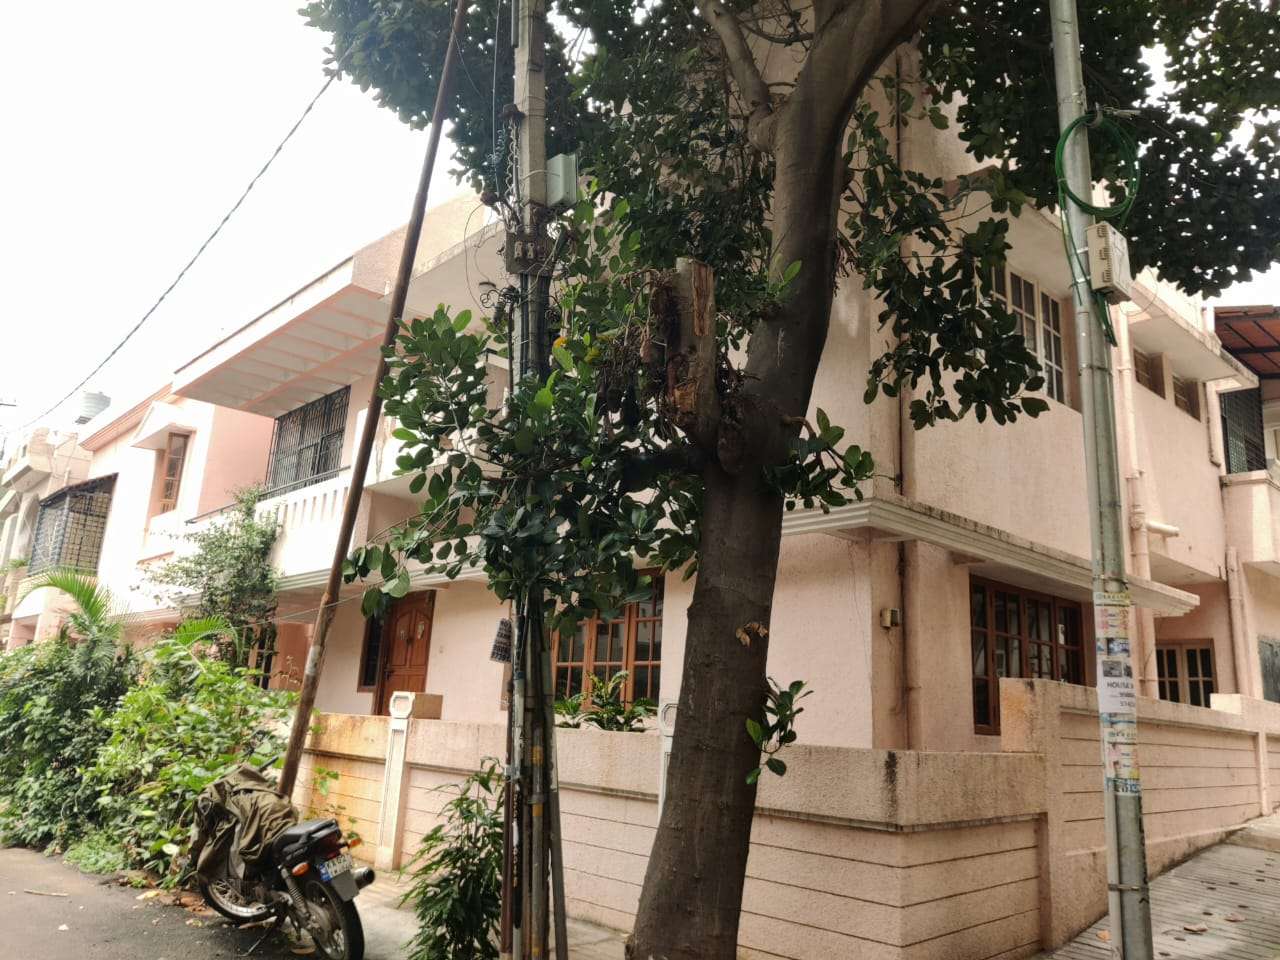 Sree Old Age Home in Basaveshwara Nagar,Bangalore - Best Orphanages For  Children in Bangalore - Justdial